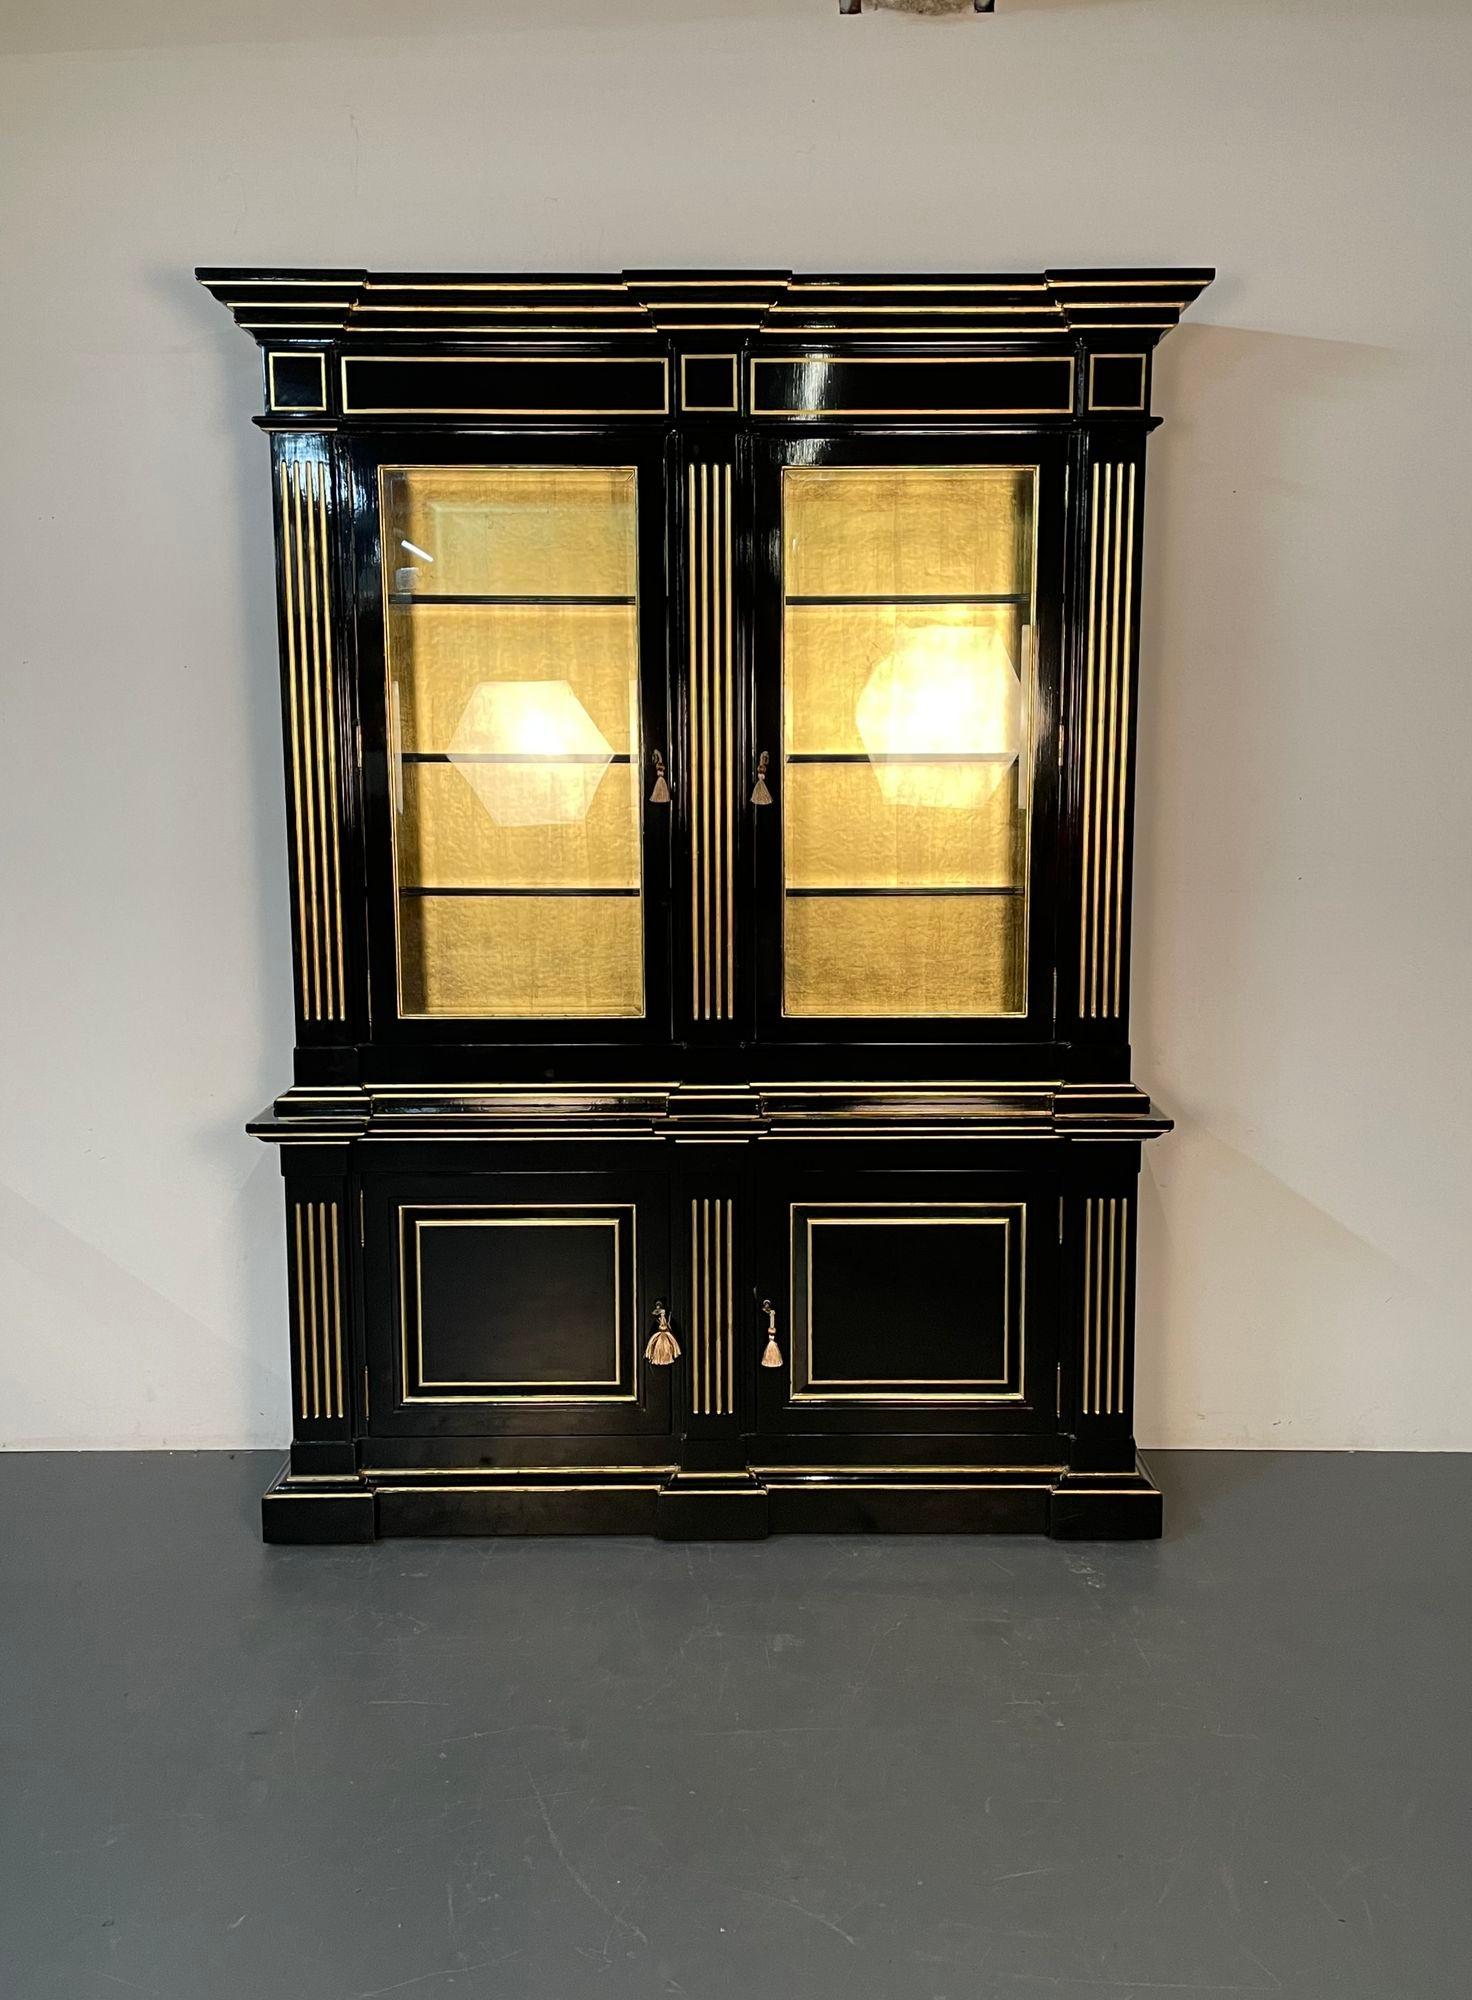 Hollywood Regency Maison Jansen Style Bookcase / China Cabinet, Ebony, Gold Leaf
 
A stunning refinished cabinet having two beveled glass doors leading onto a gilt leaf backing under a lighted interior. The thin sleek top with gilt reeded design